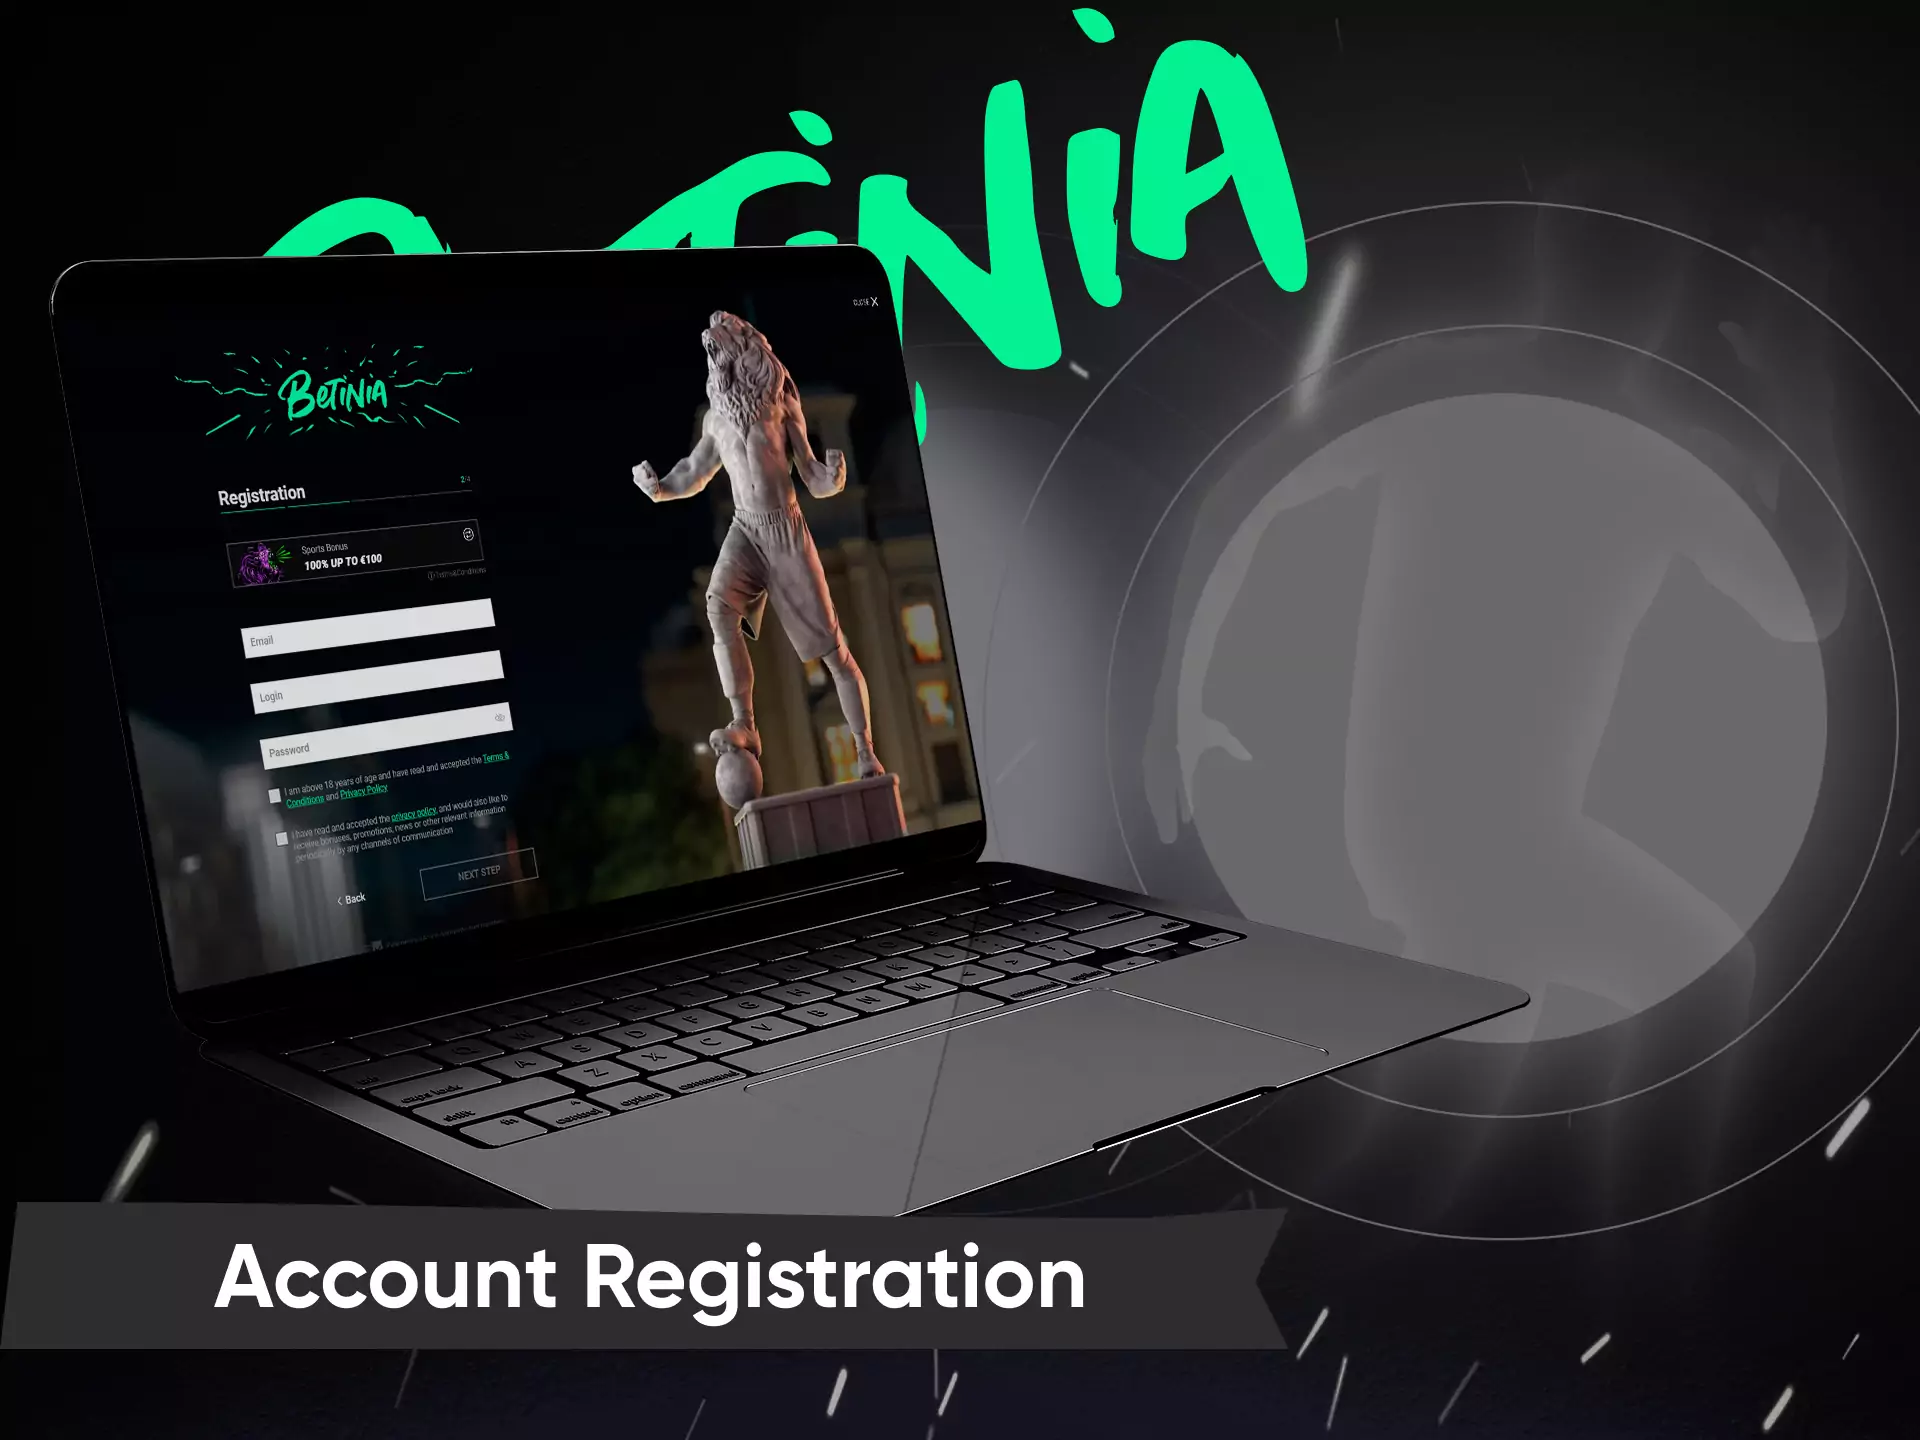 To start betting on Betinia, you have to create an account.